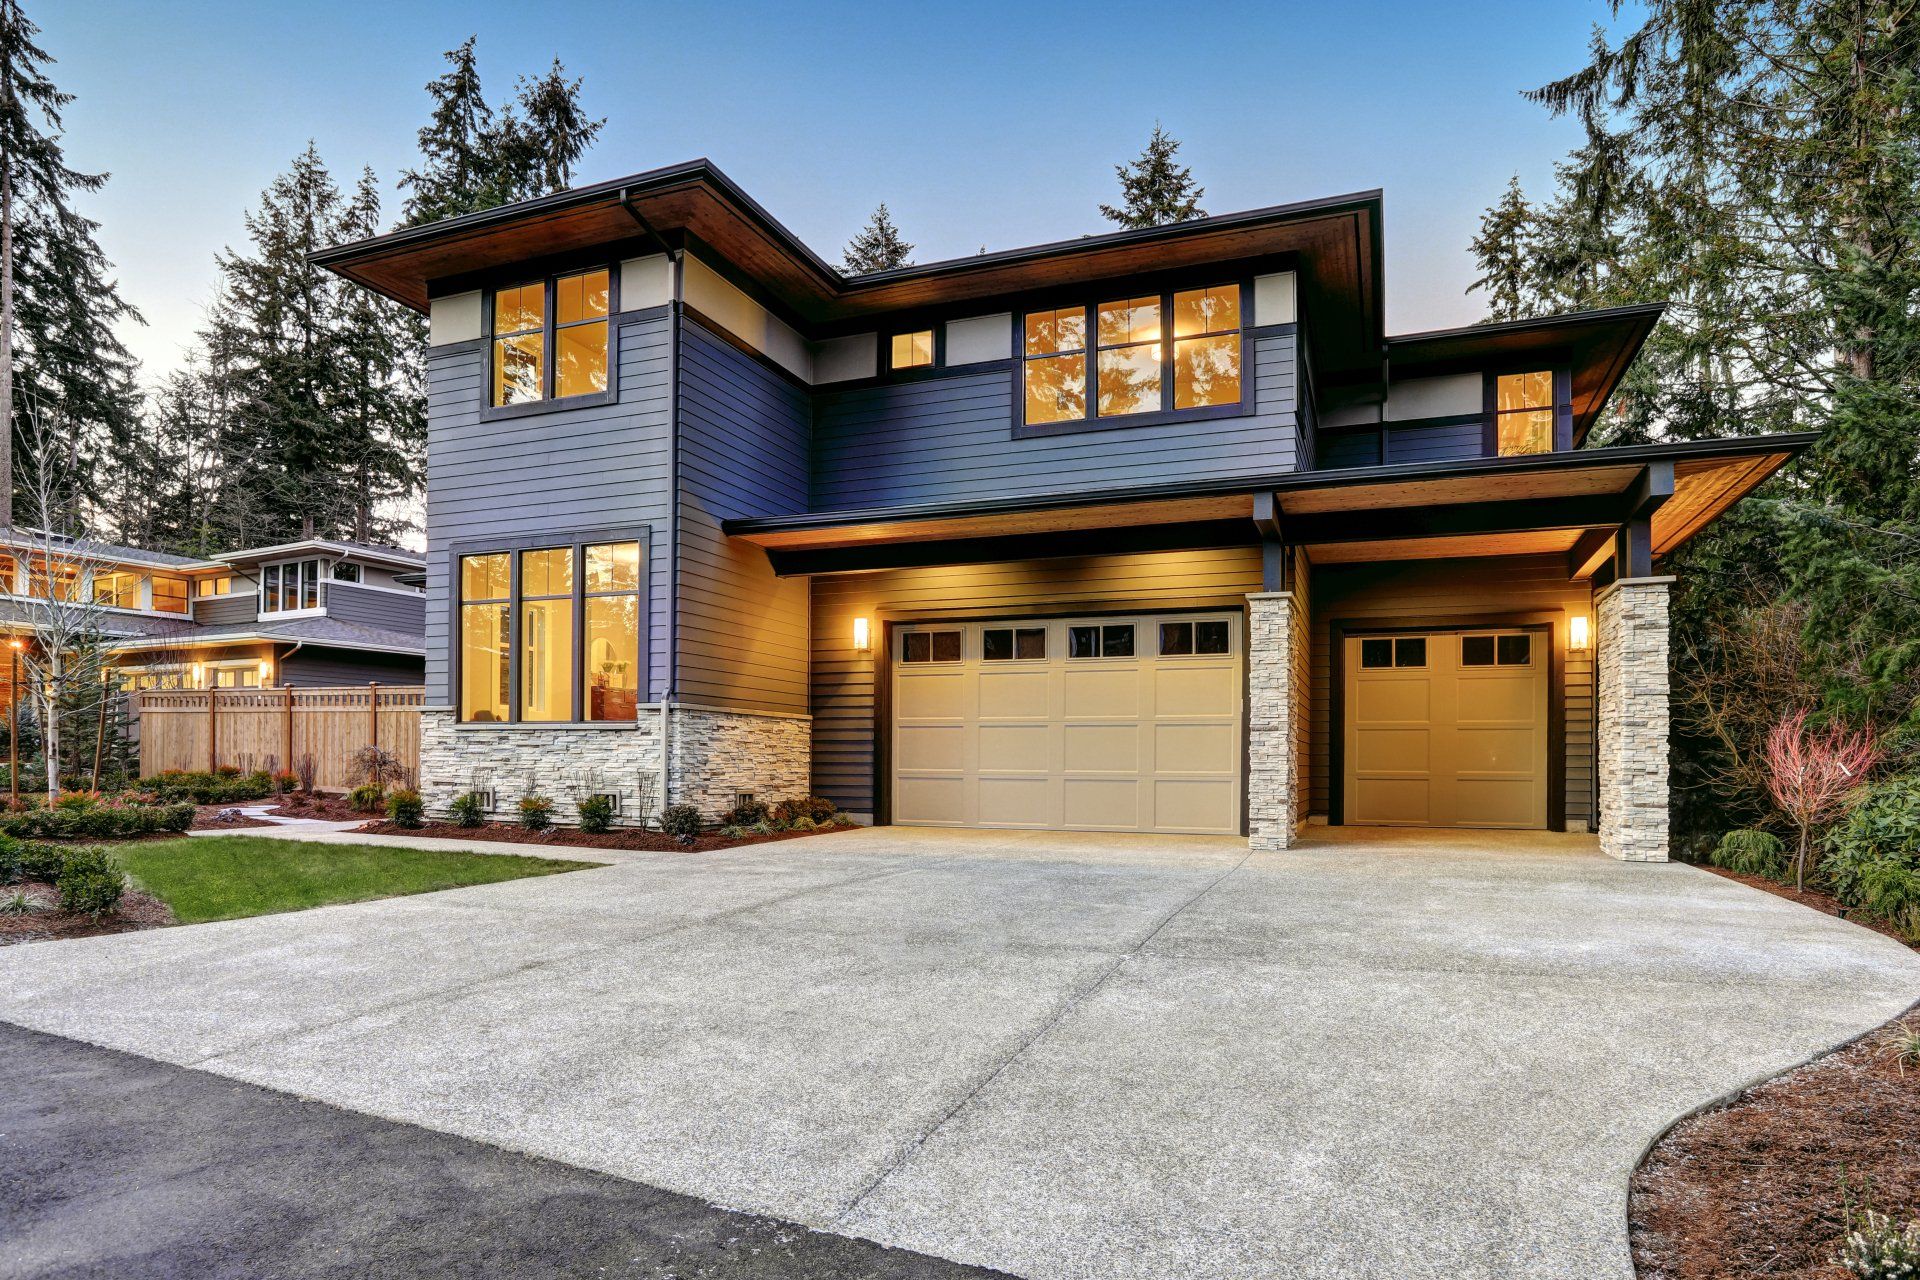 Modern style home boasts two car garage framed by blue siding and natural stone wall trim